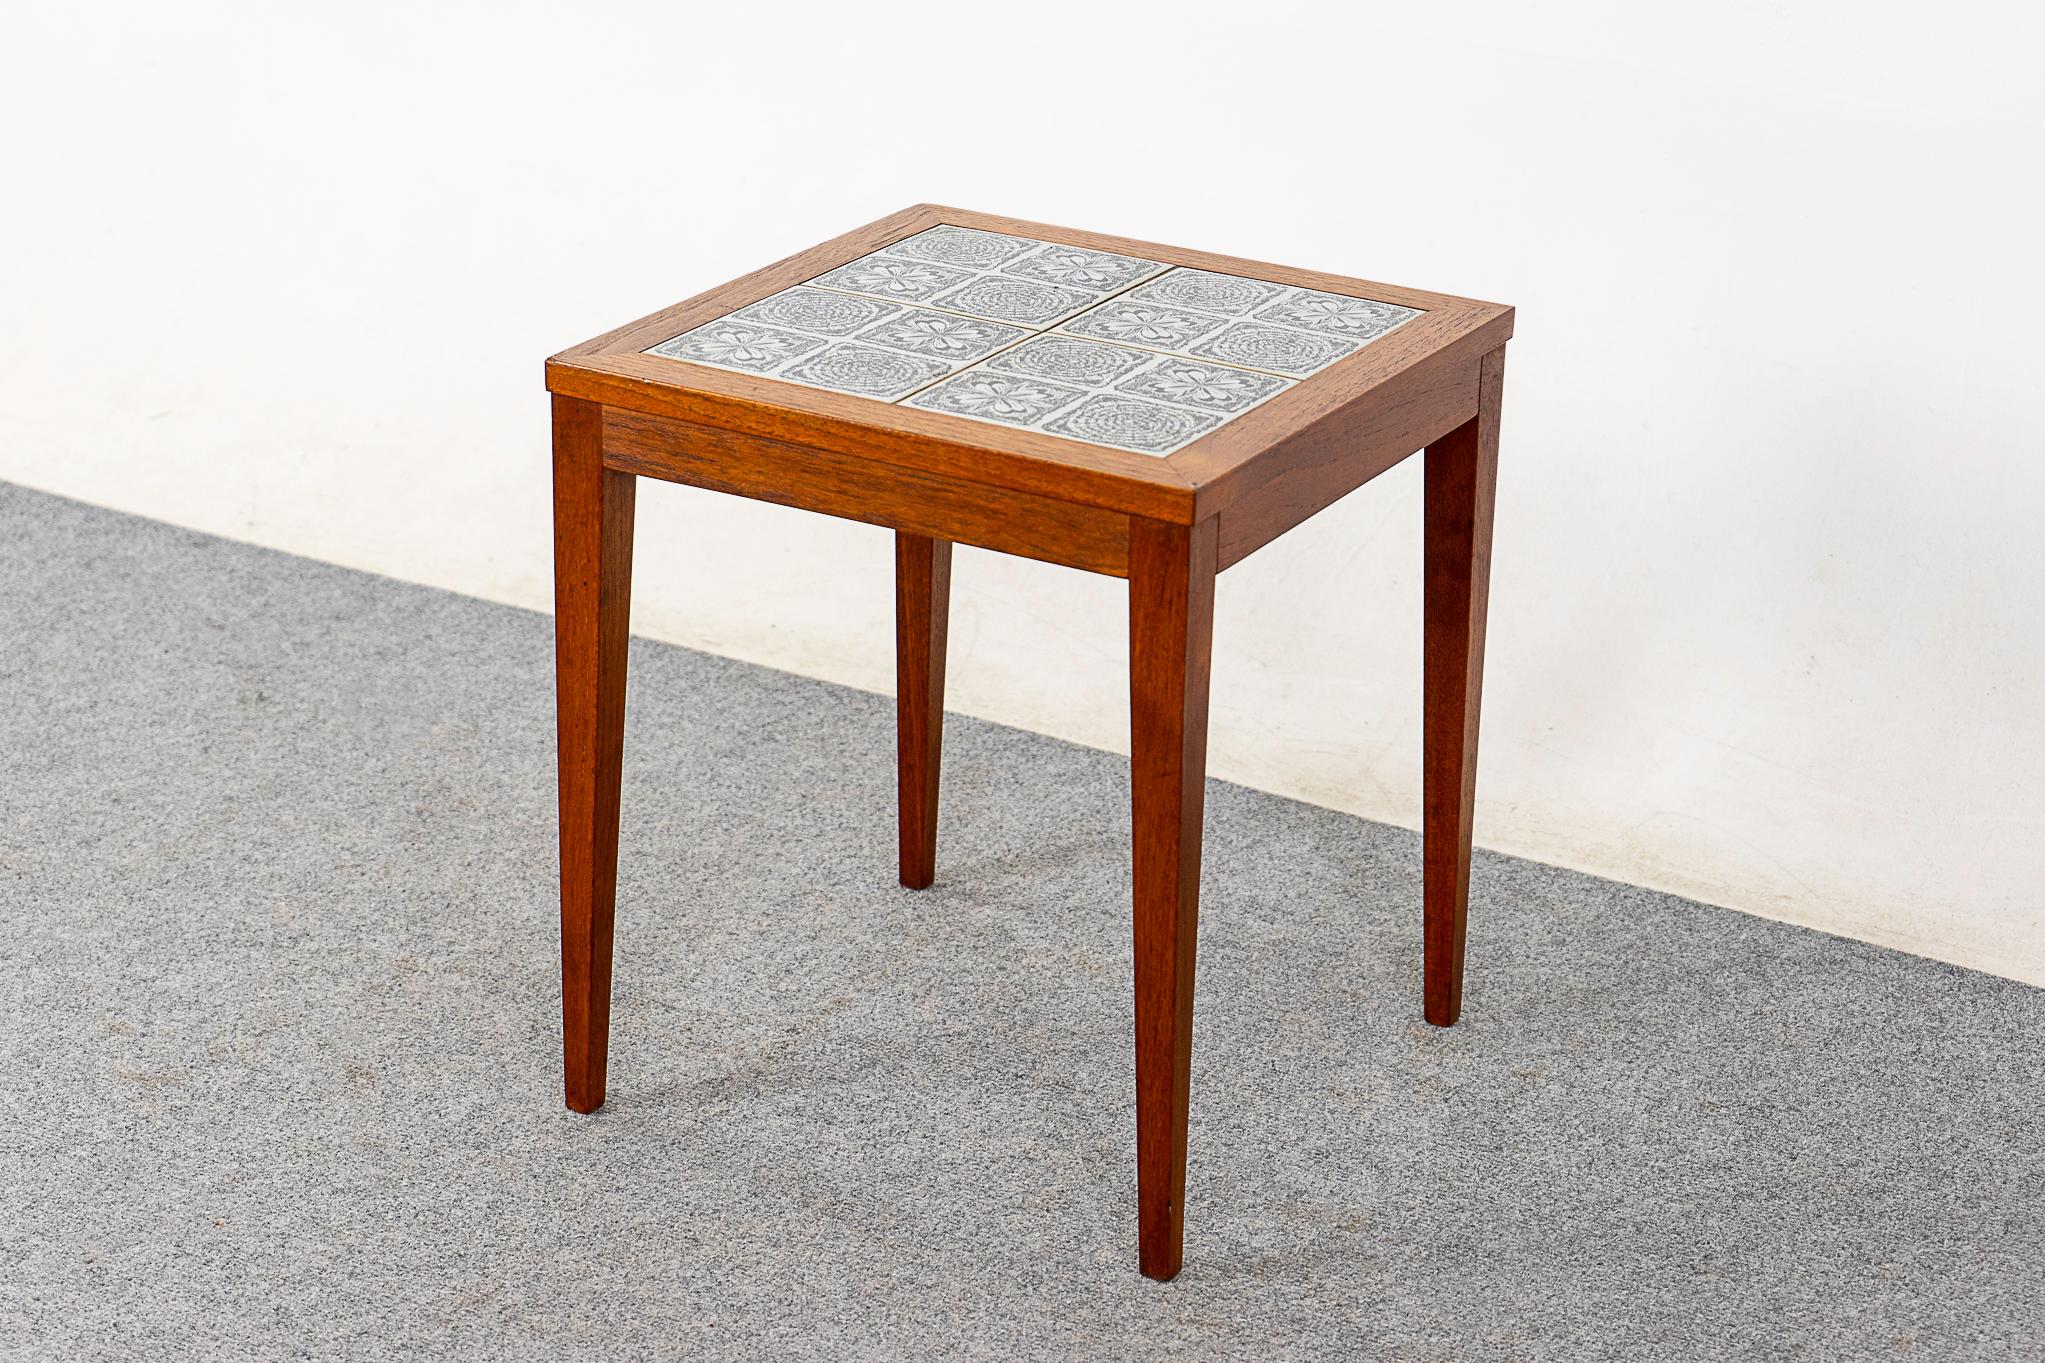 Teak & tile mid-century side table, circa 1960's. Clean lines, tapered legs and a compact profile! The decorative alternating tiles contrast beautifully with the warm tone of the frame. Pop this beside your comfy lounger, voila!

Please inquire for